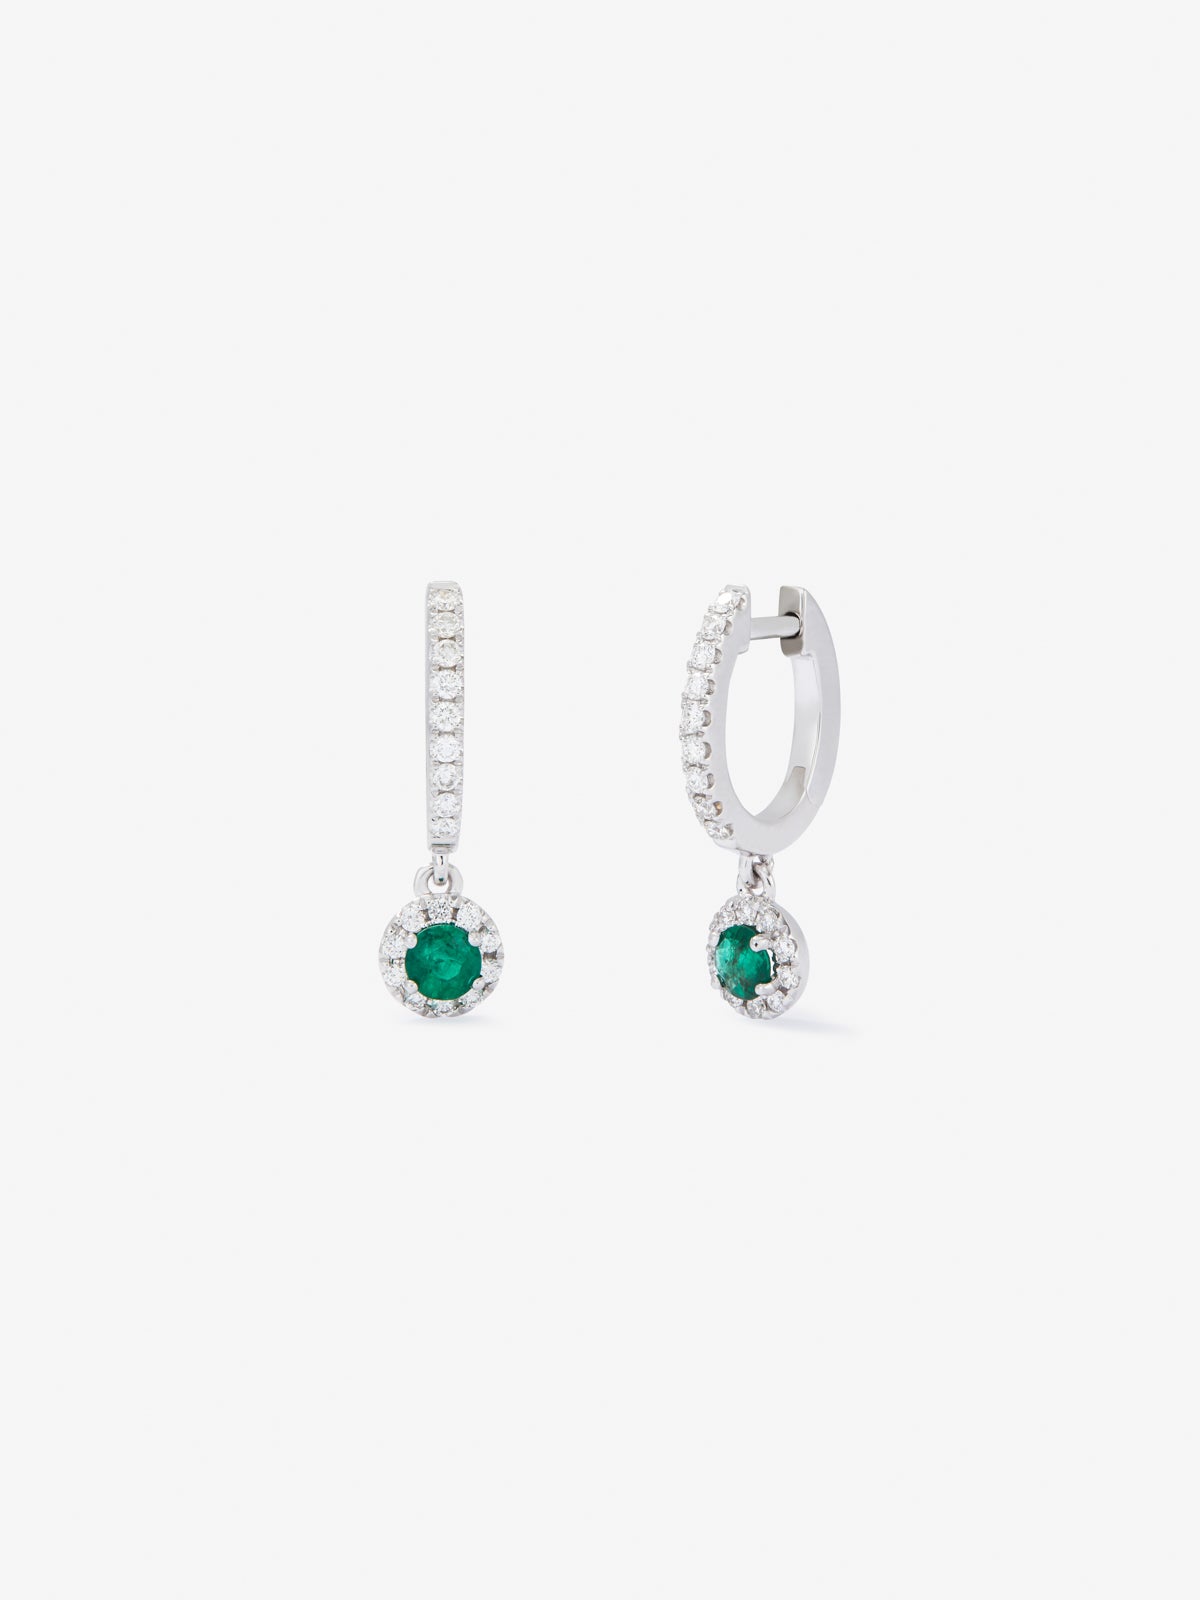 18K white gold hoop earrings with 38 brilliant-cut diamonds with a total of 0.3 cts and 2 brilliant-cut green emeralds with a total of 0.23 cts